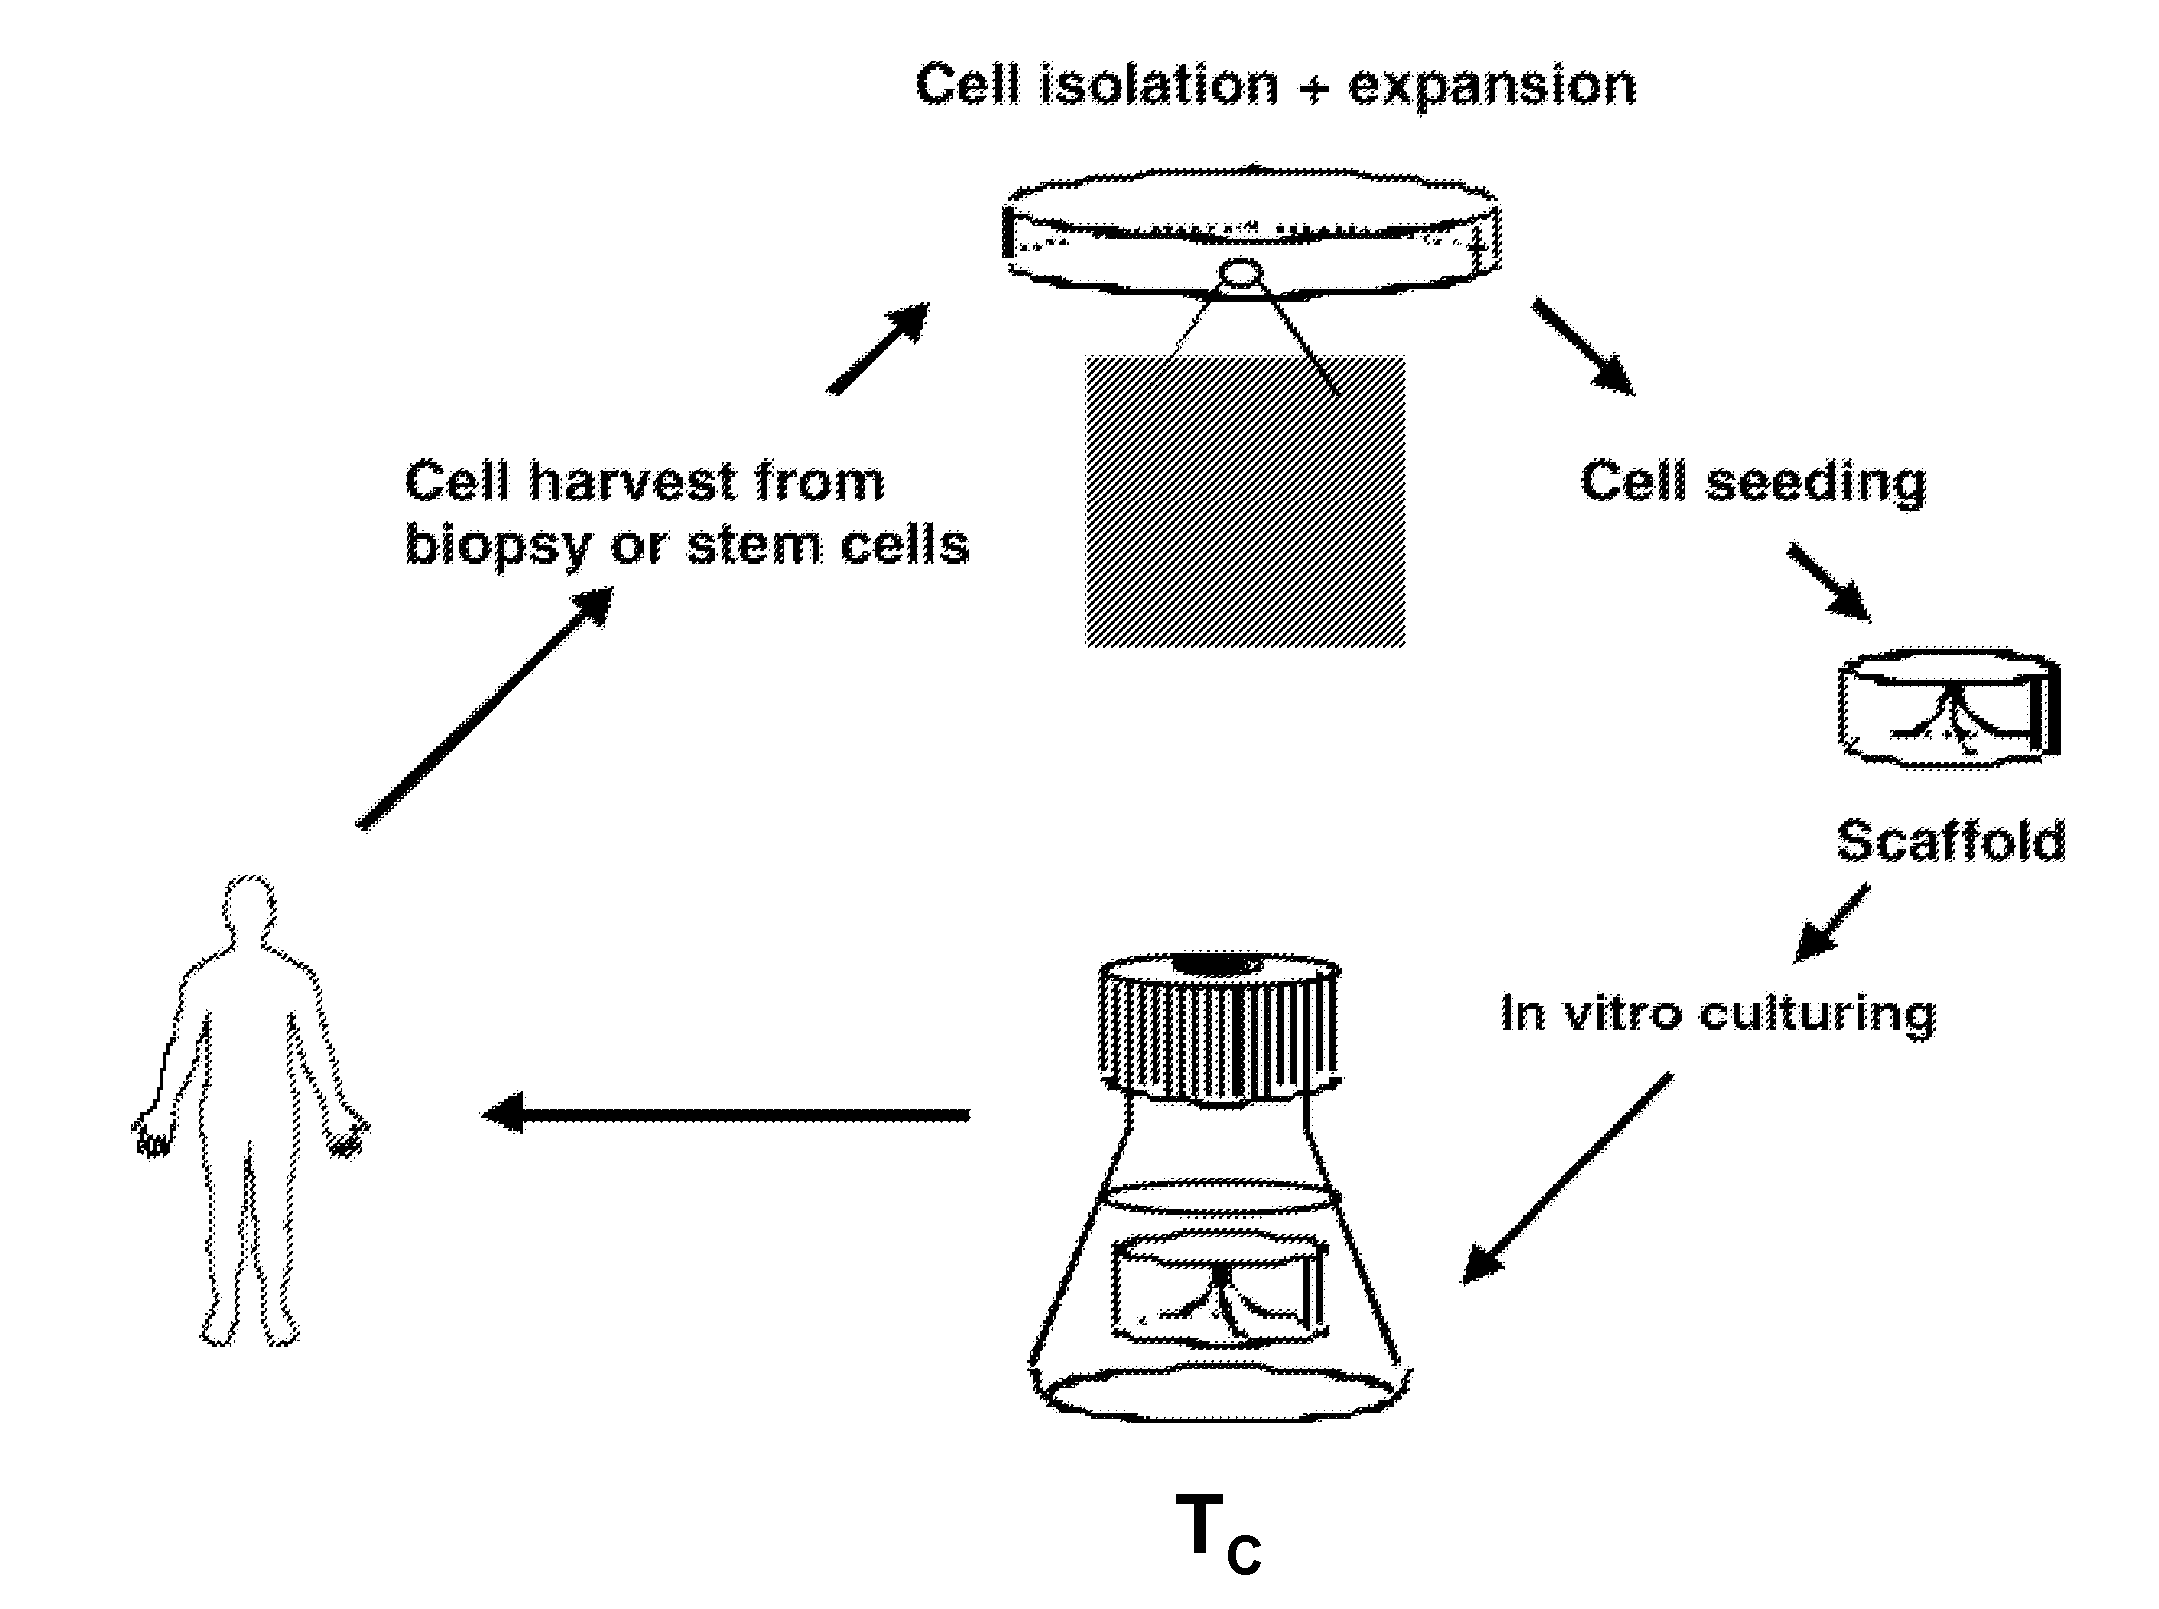 Ultrasound accelerated tissue engineering process